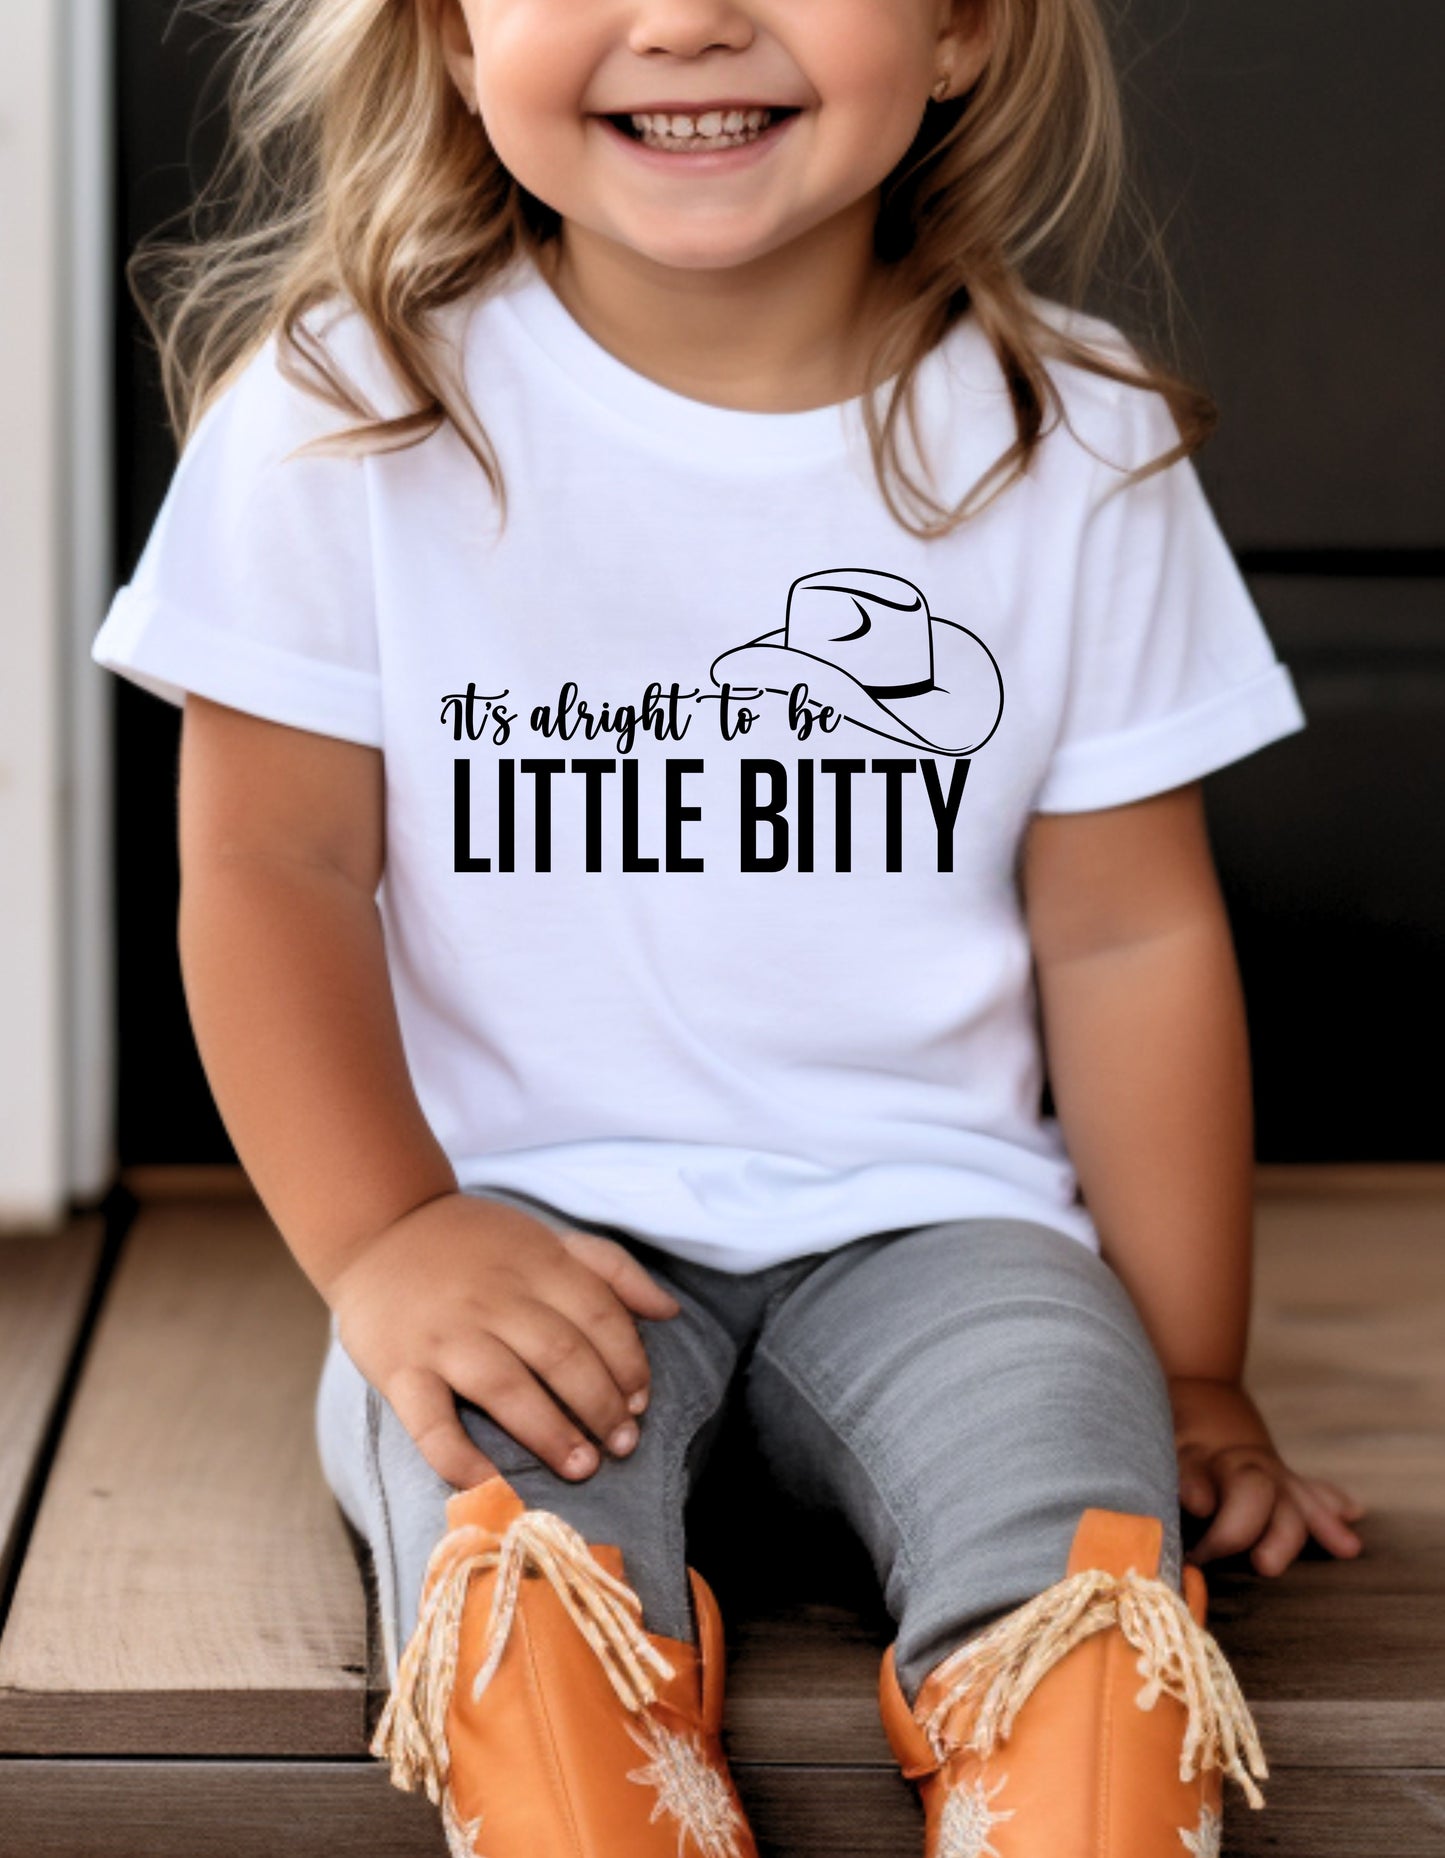 IT'S ALRIGHT TO BE LITTLE BITTY TEE